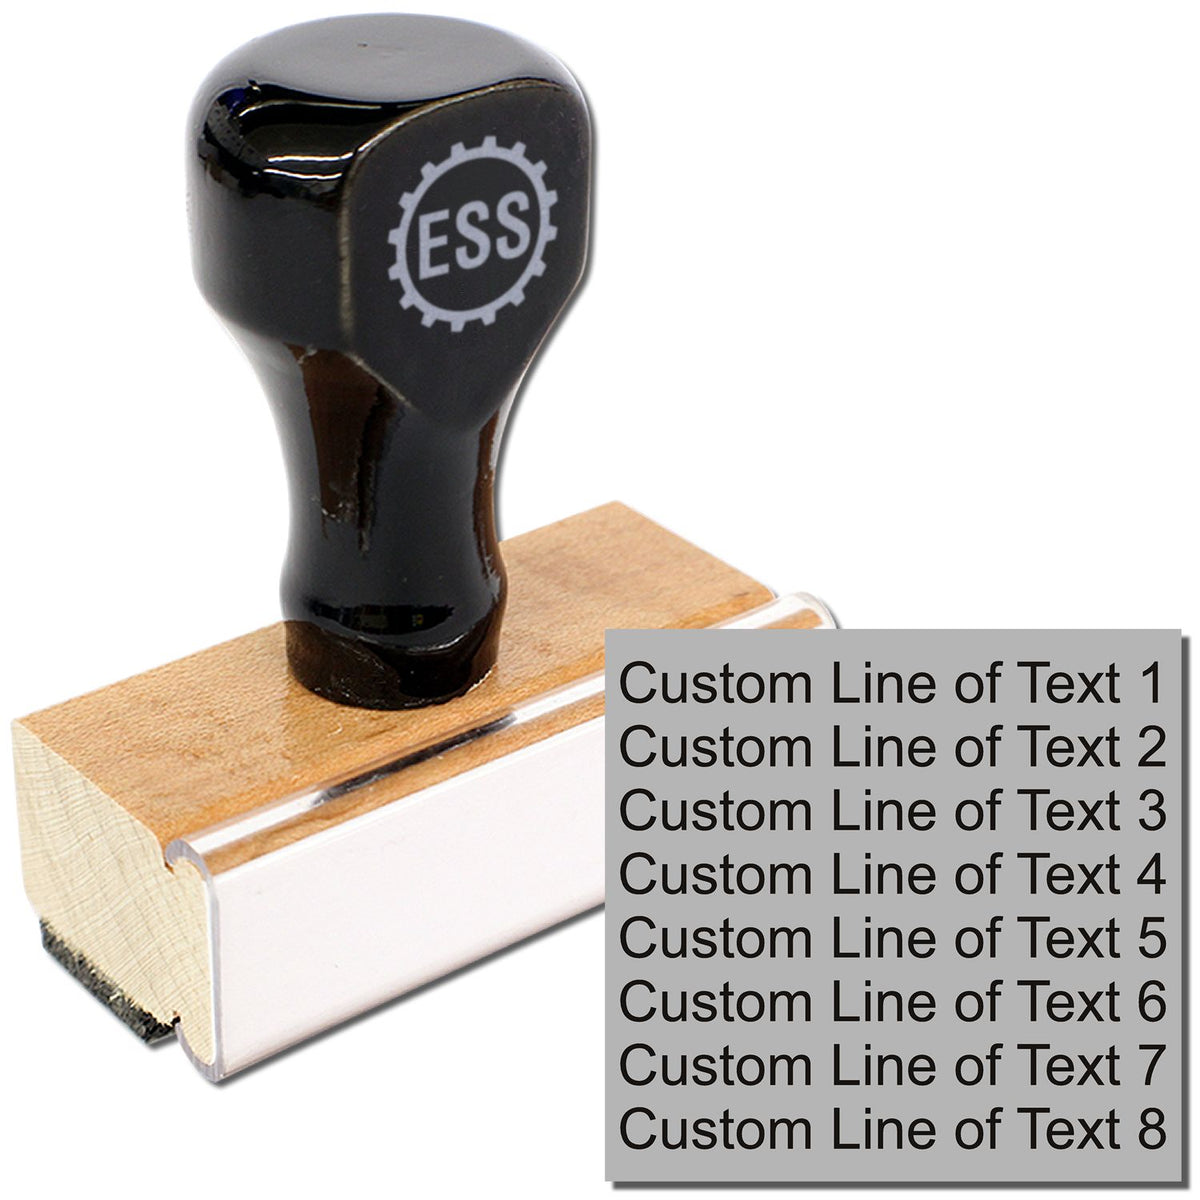 8 Line Custom Rubber Stamp with Wood Handle